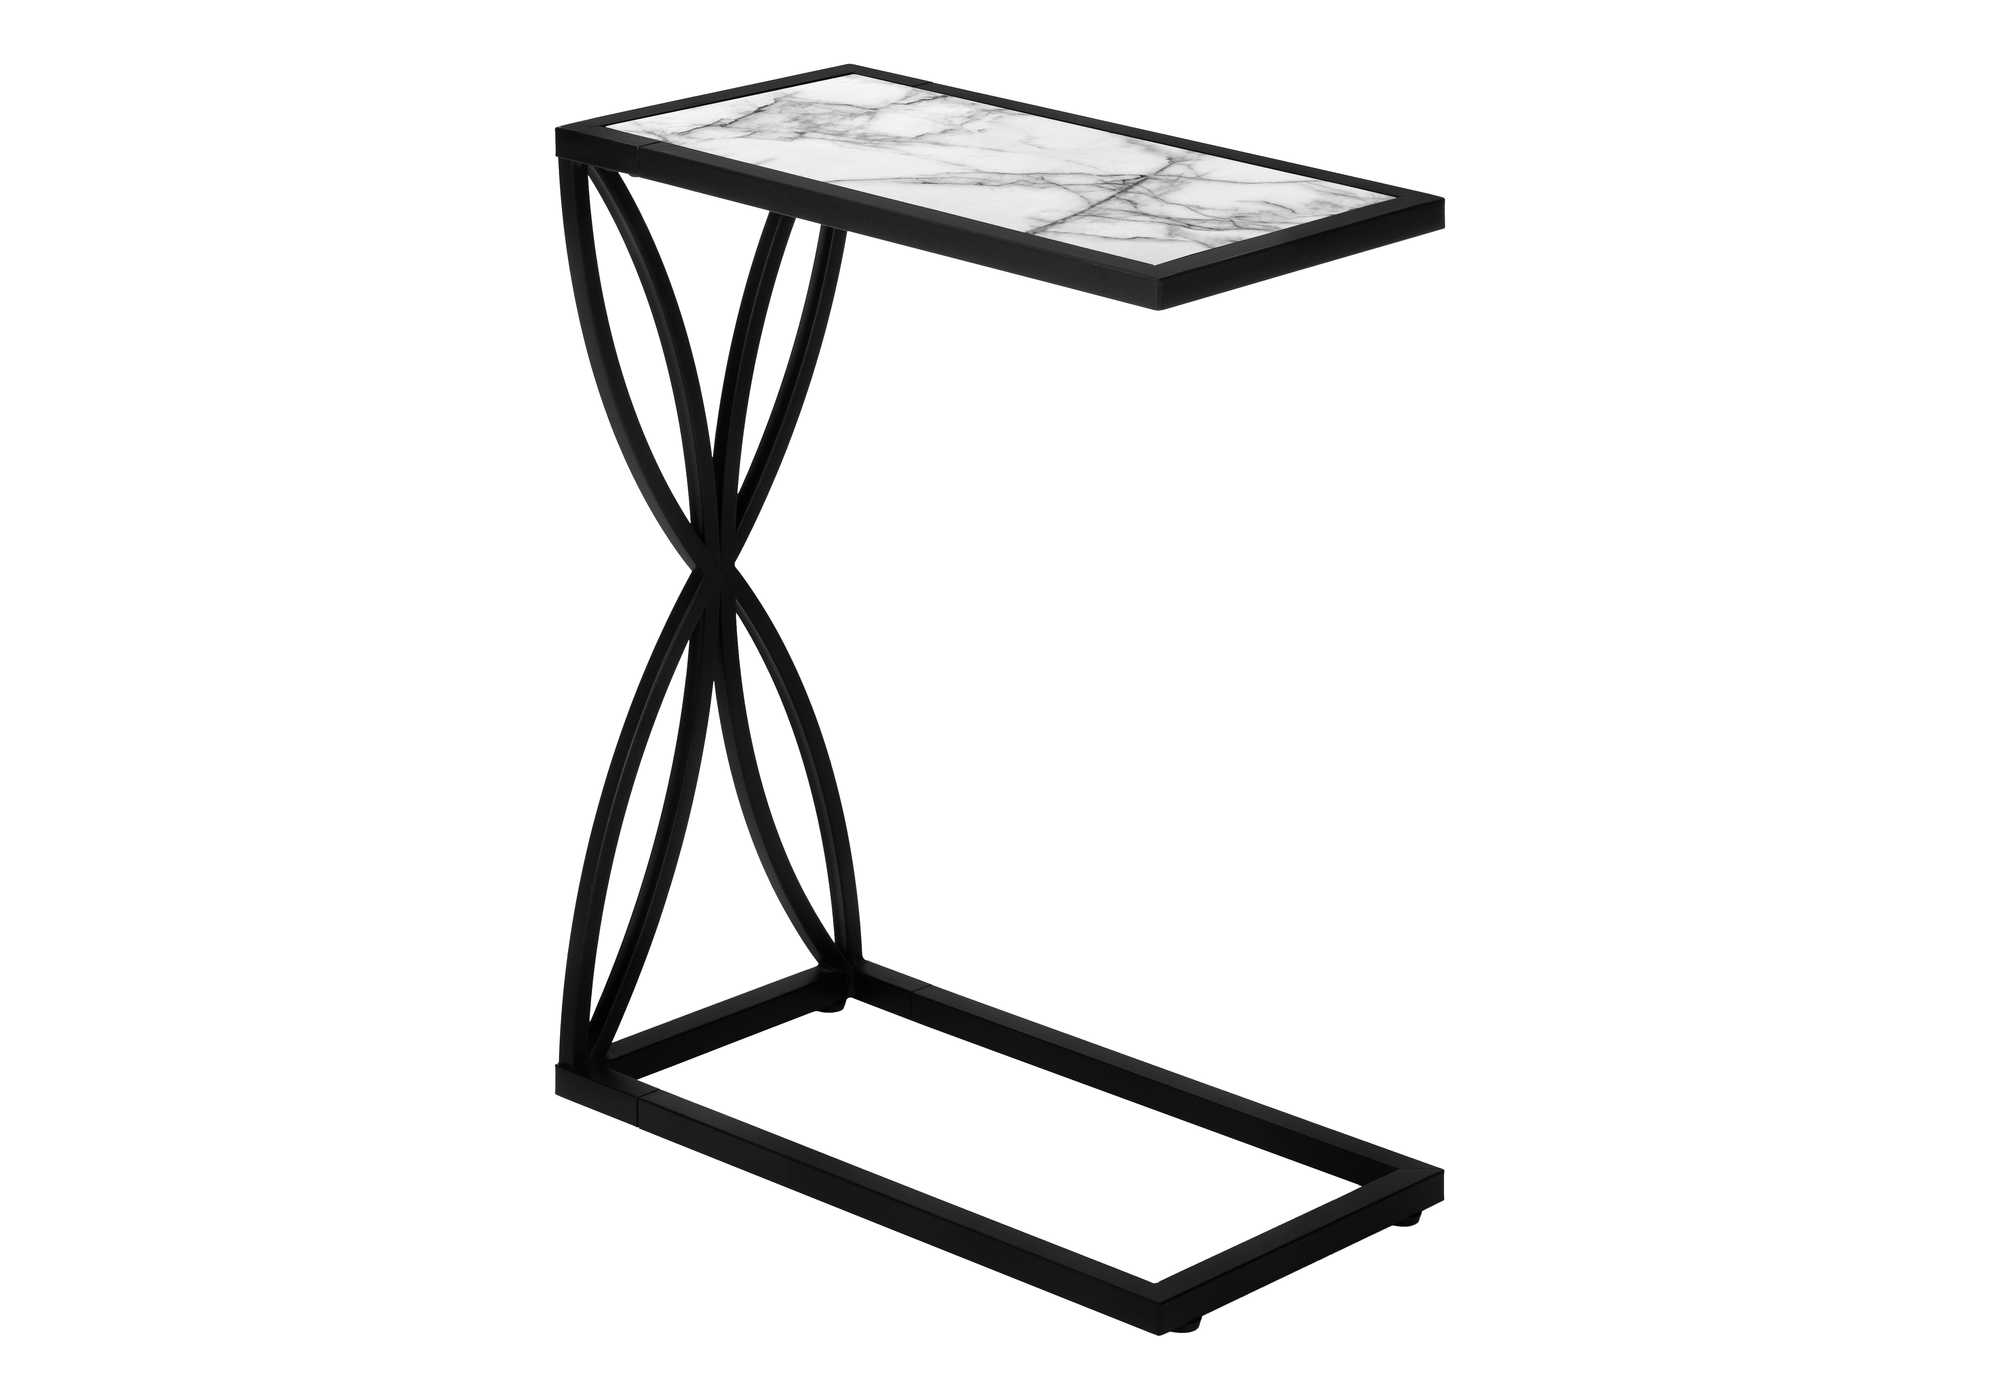 BEDROOM ACCENT TABLE - 25"H / WHITE MARBLE-LOOK / BLACK METAL